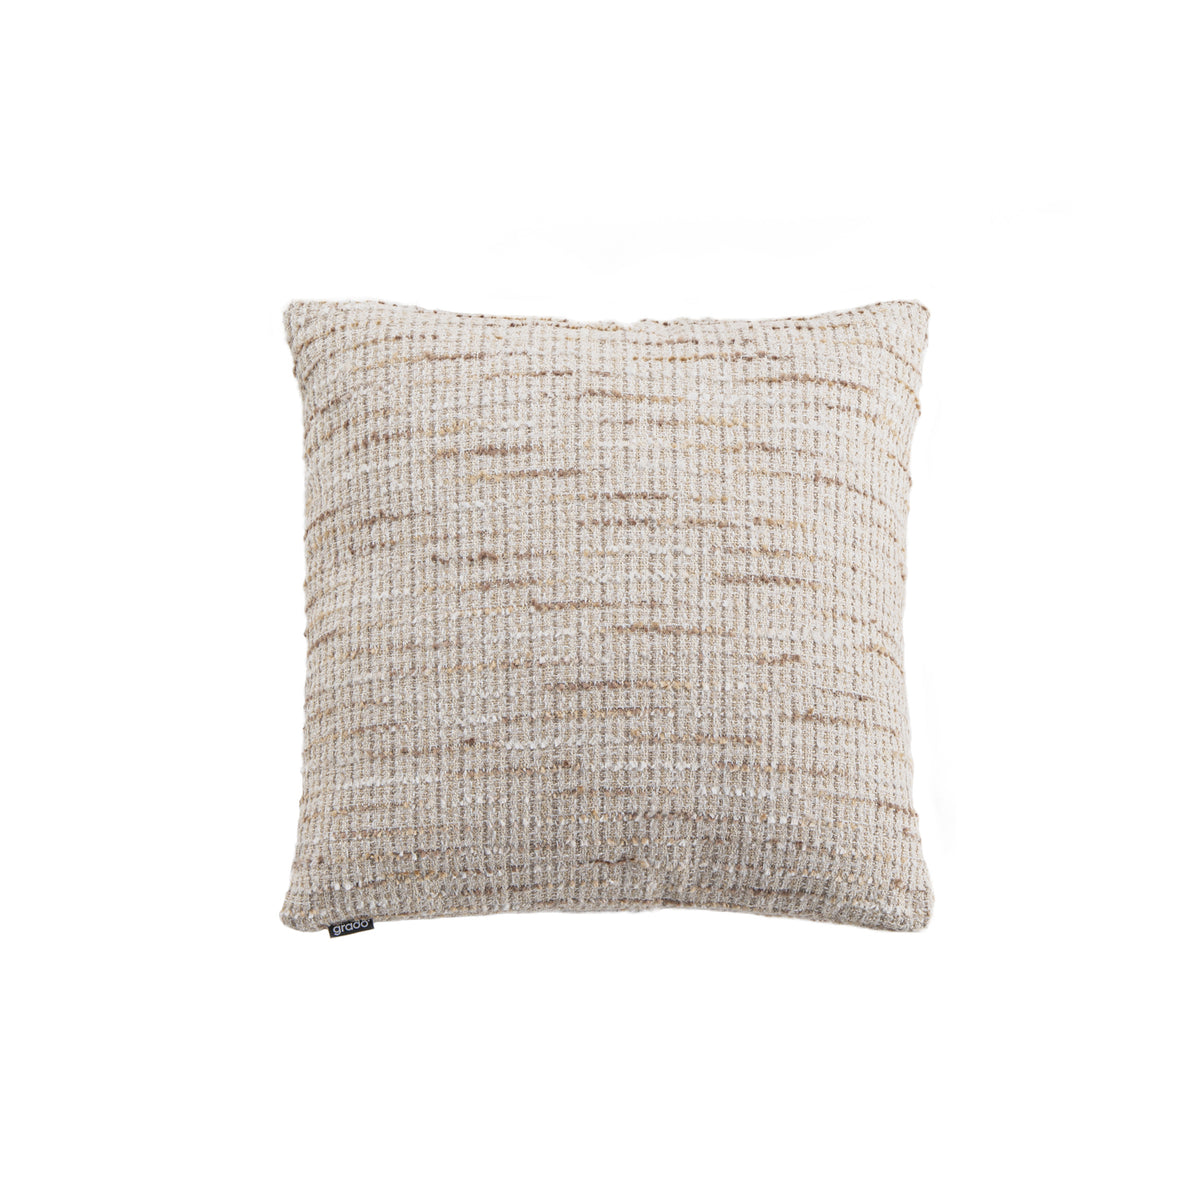 Chanel style Cushion - Toss pillow